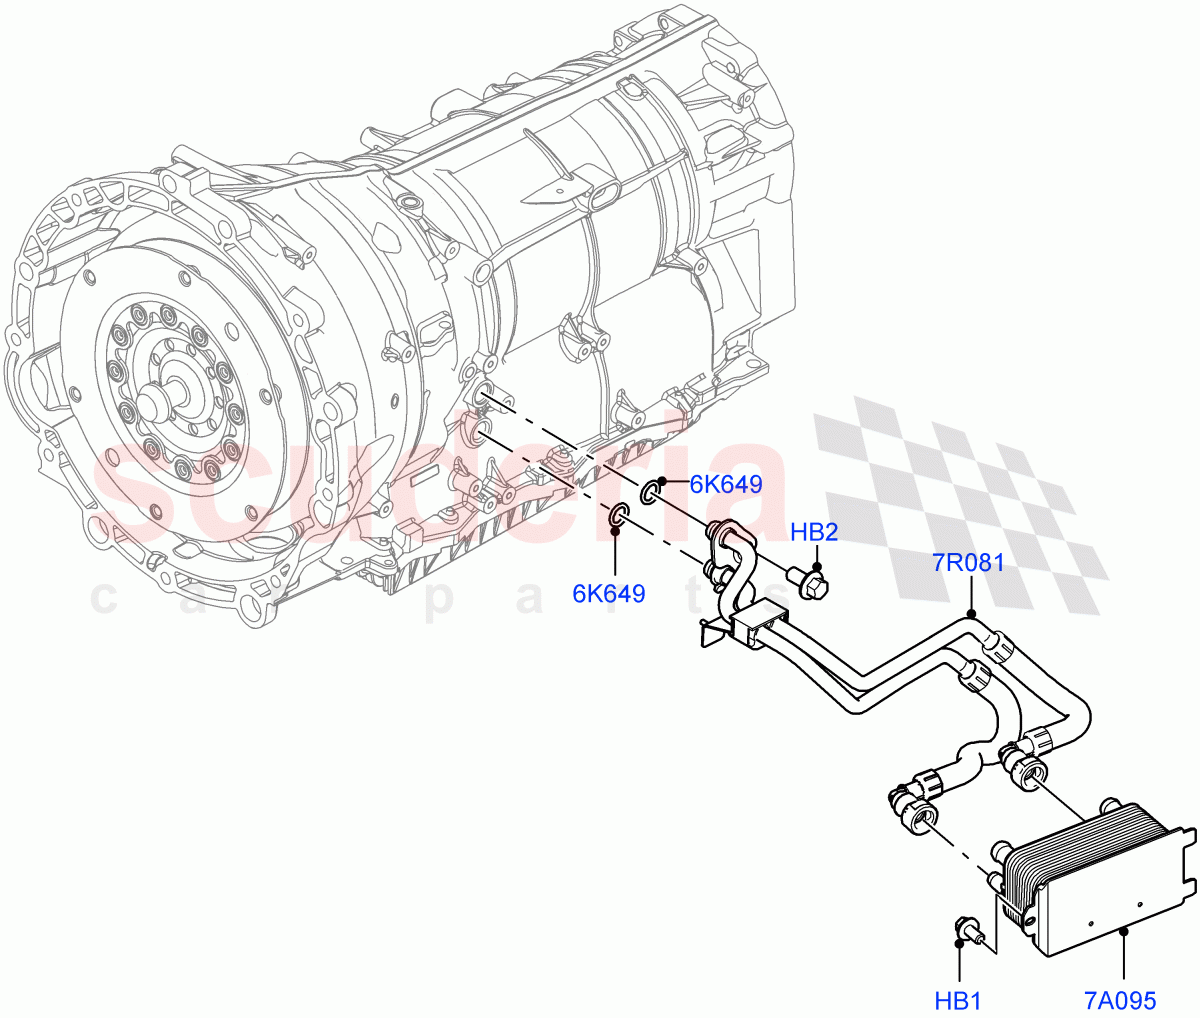 Transmission Cooling Systems(Nitra Plant Build)(3.0L AJ20P6 Petrol High,8 Speed Auto Trans ZF 8HP76,3.0L AJ20D6 Diesel High) of Land Rover Land Rover Discovery 5 (2017+) [3.0 I6 Turbo Petrol AJ20P6]